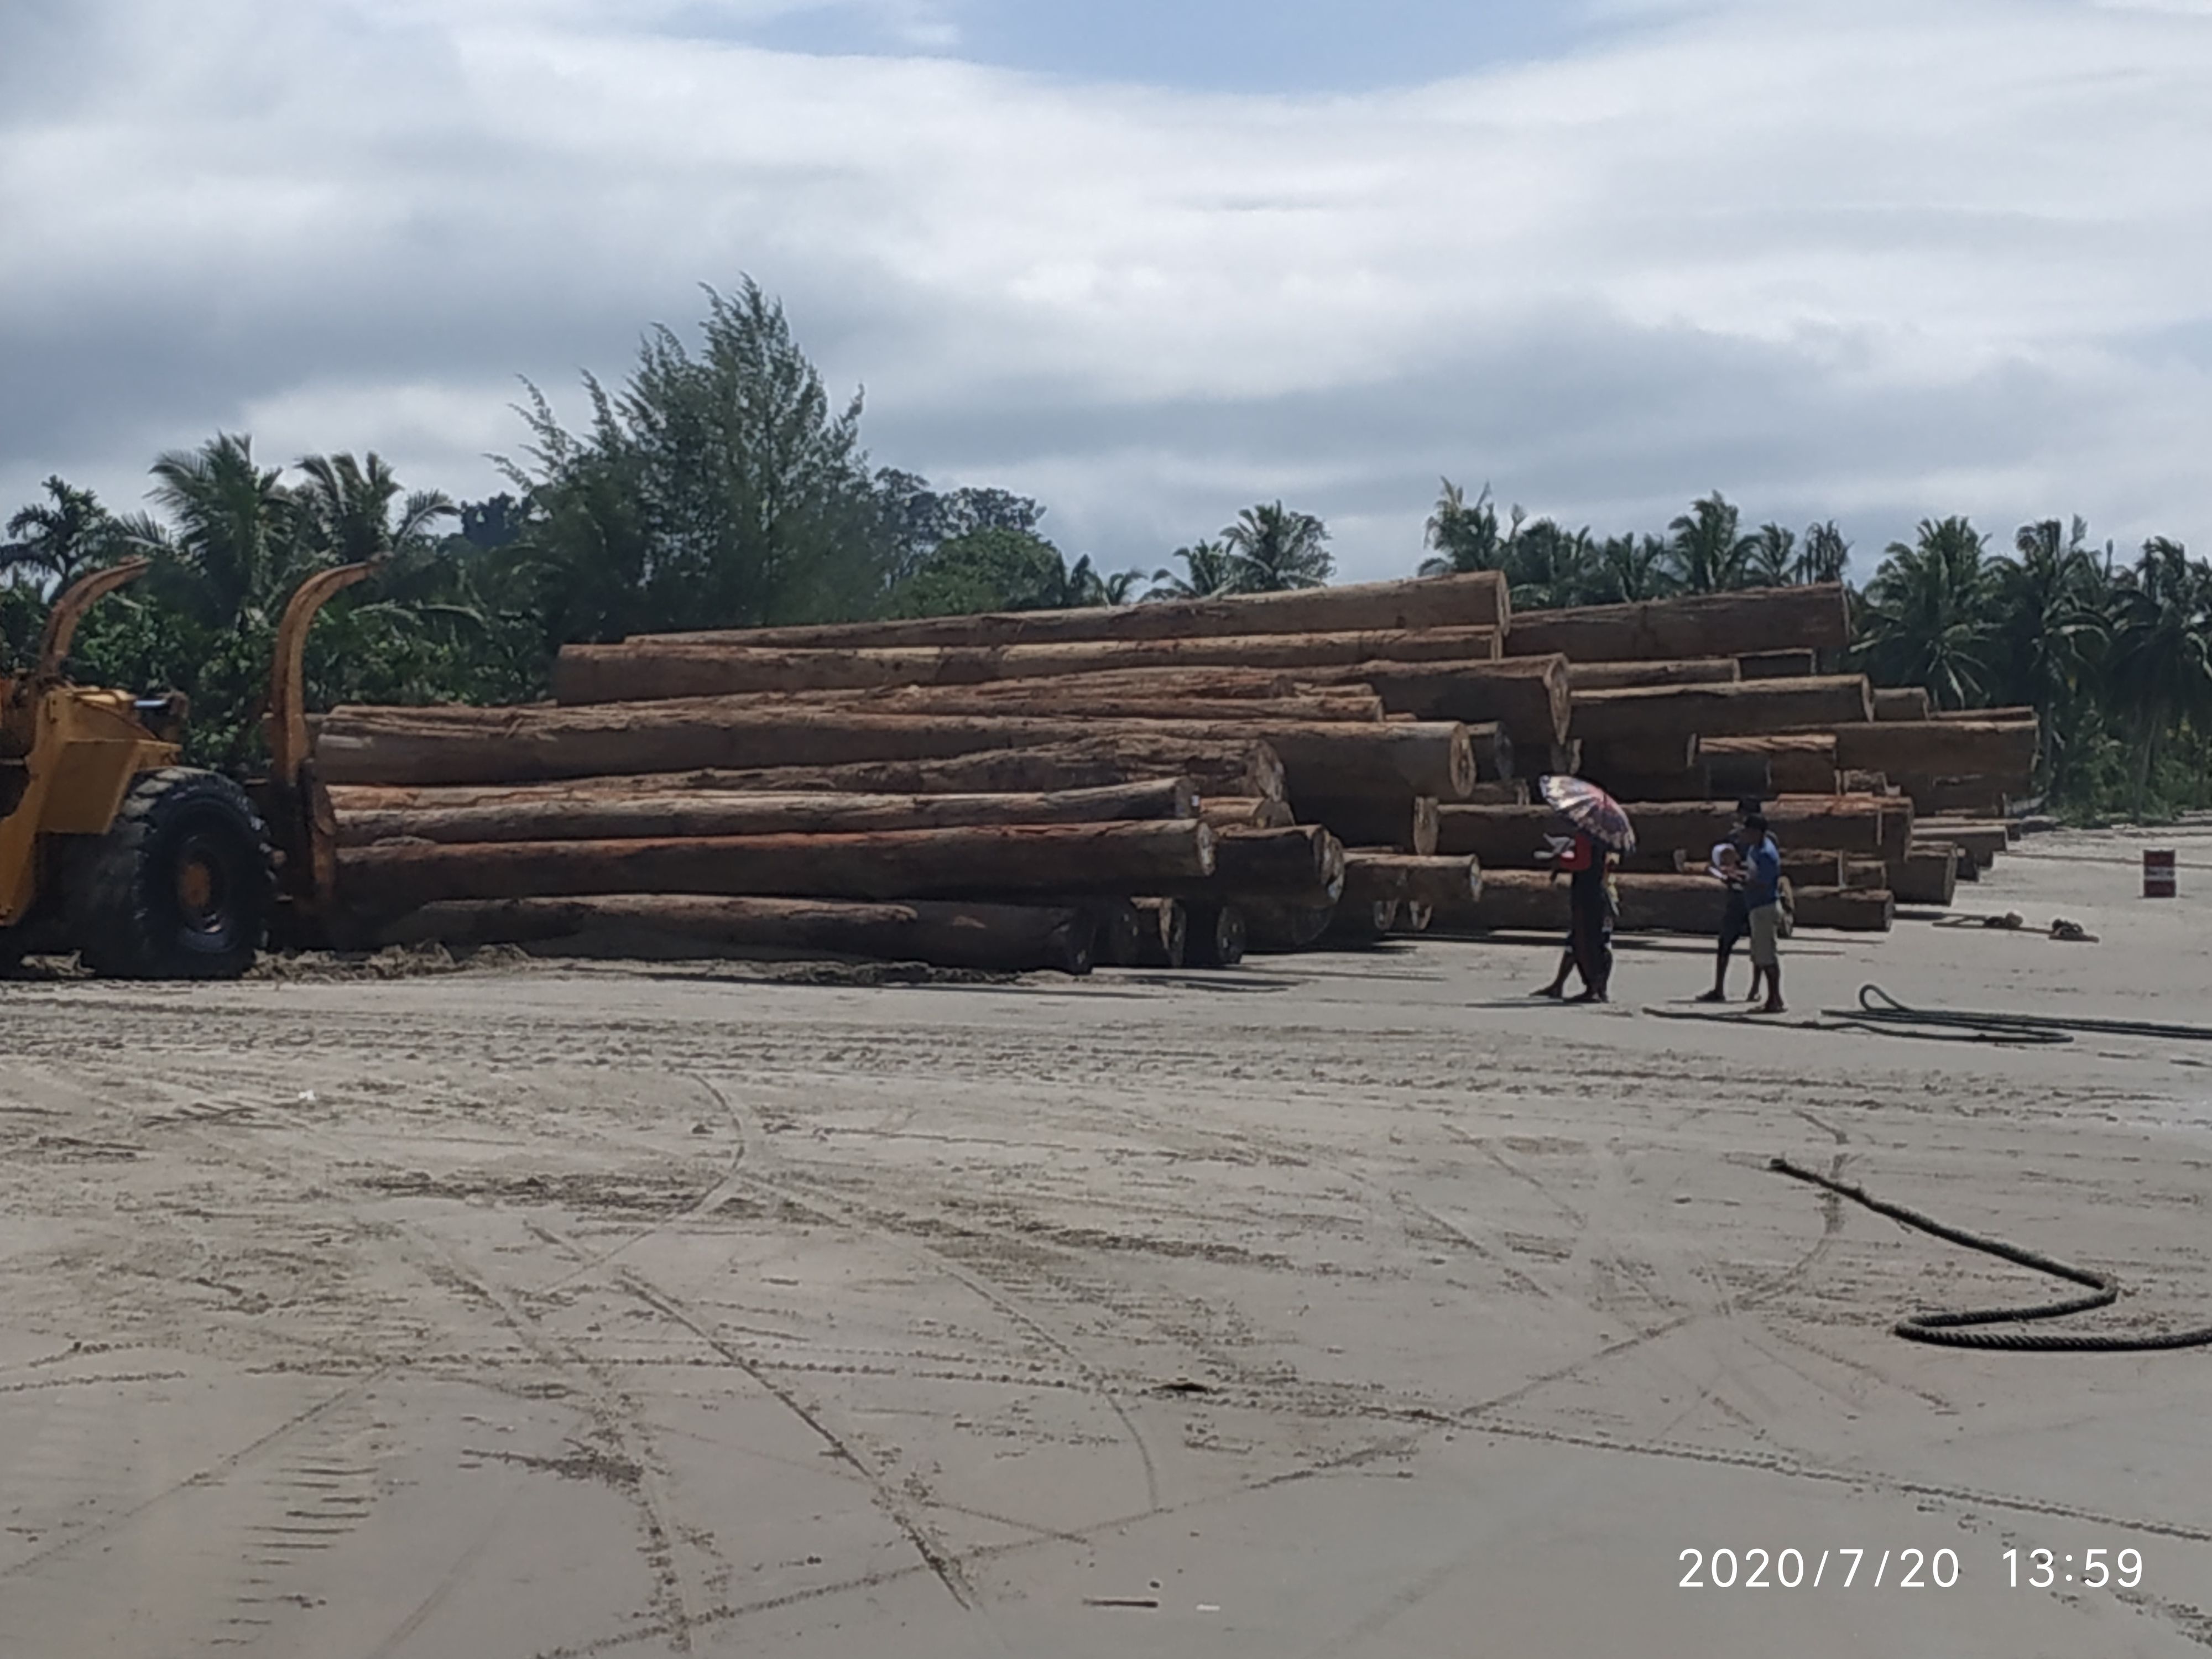 The loading activity of HPH logs from one of the companies on Tinitit Beach, Siberut Island, Mentawai Islands, West Sumatra last July. Image by Febrianti. Indonesia, 2020.
